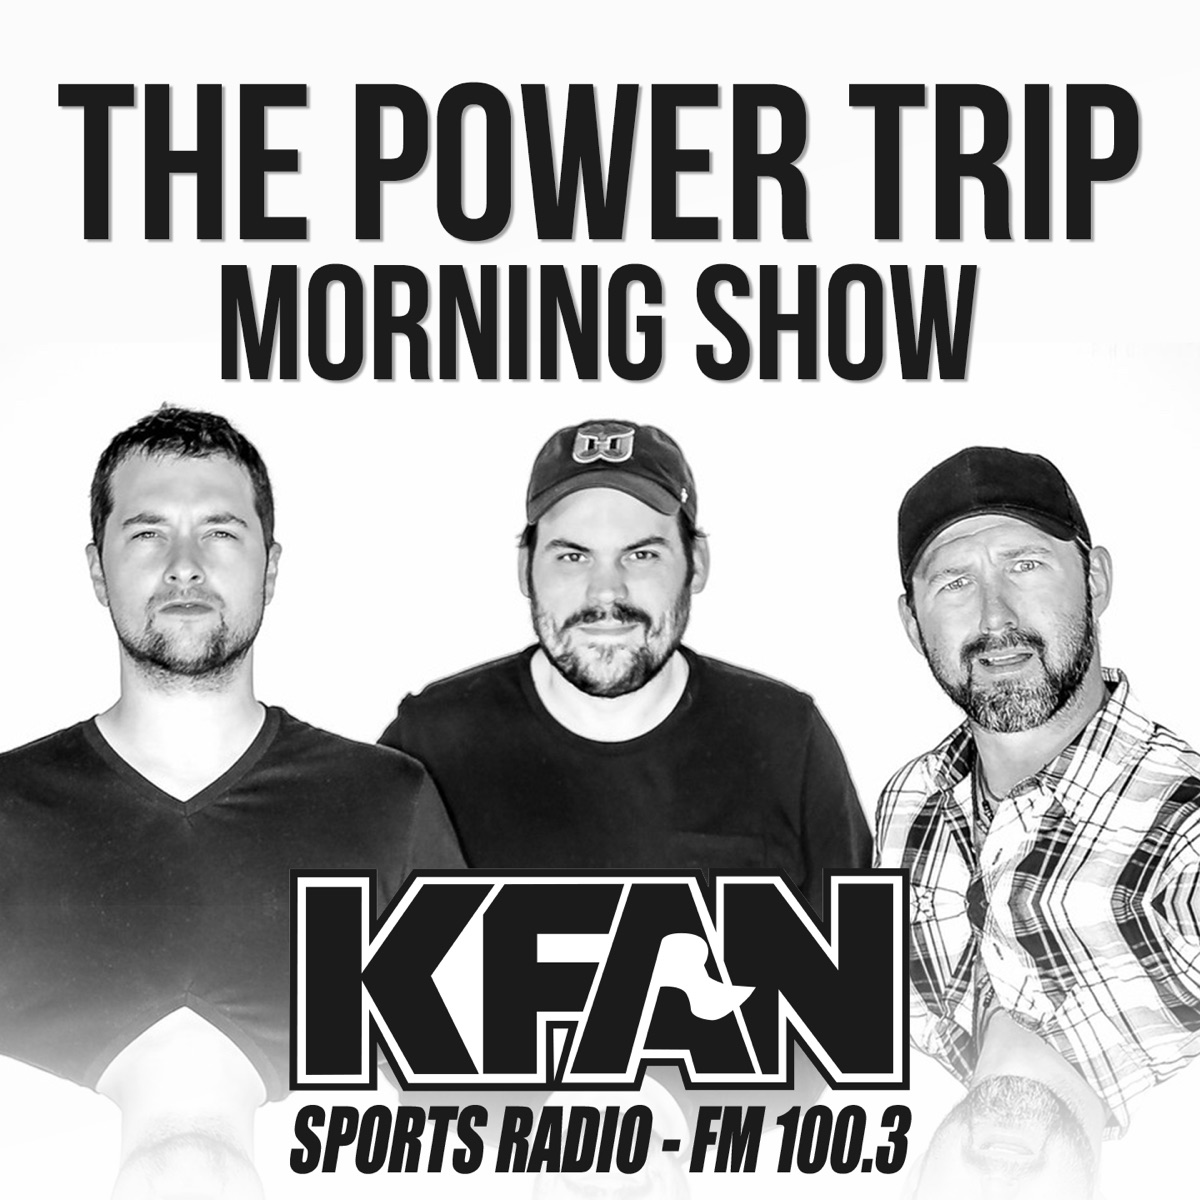 The Power Trip Morning Show